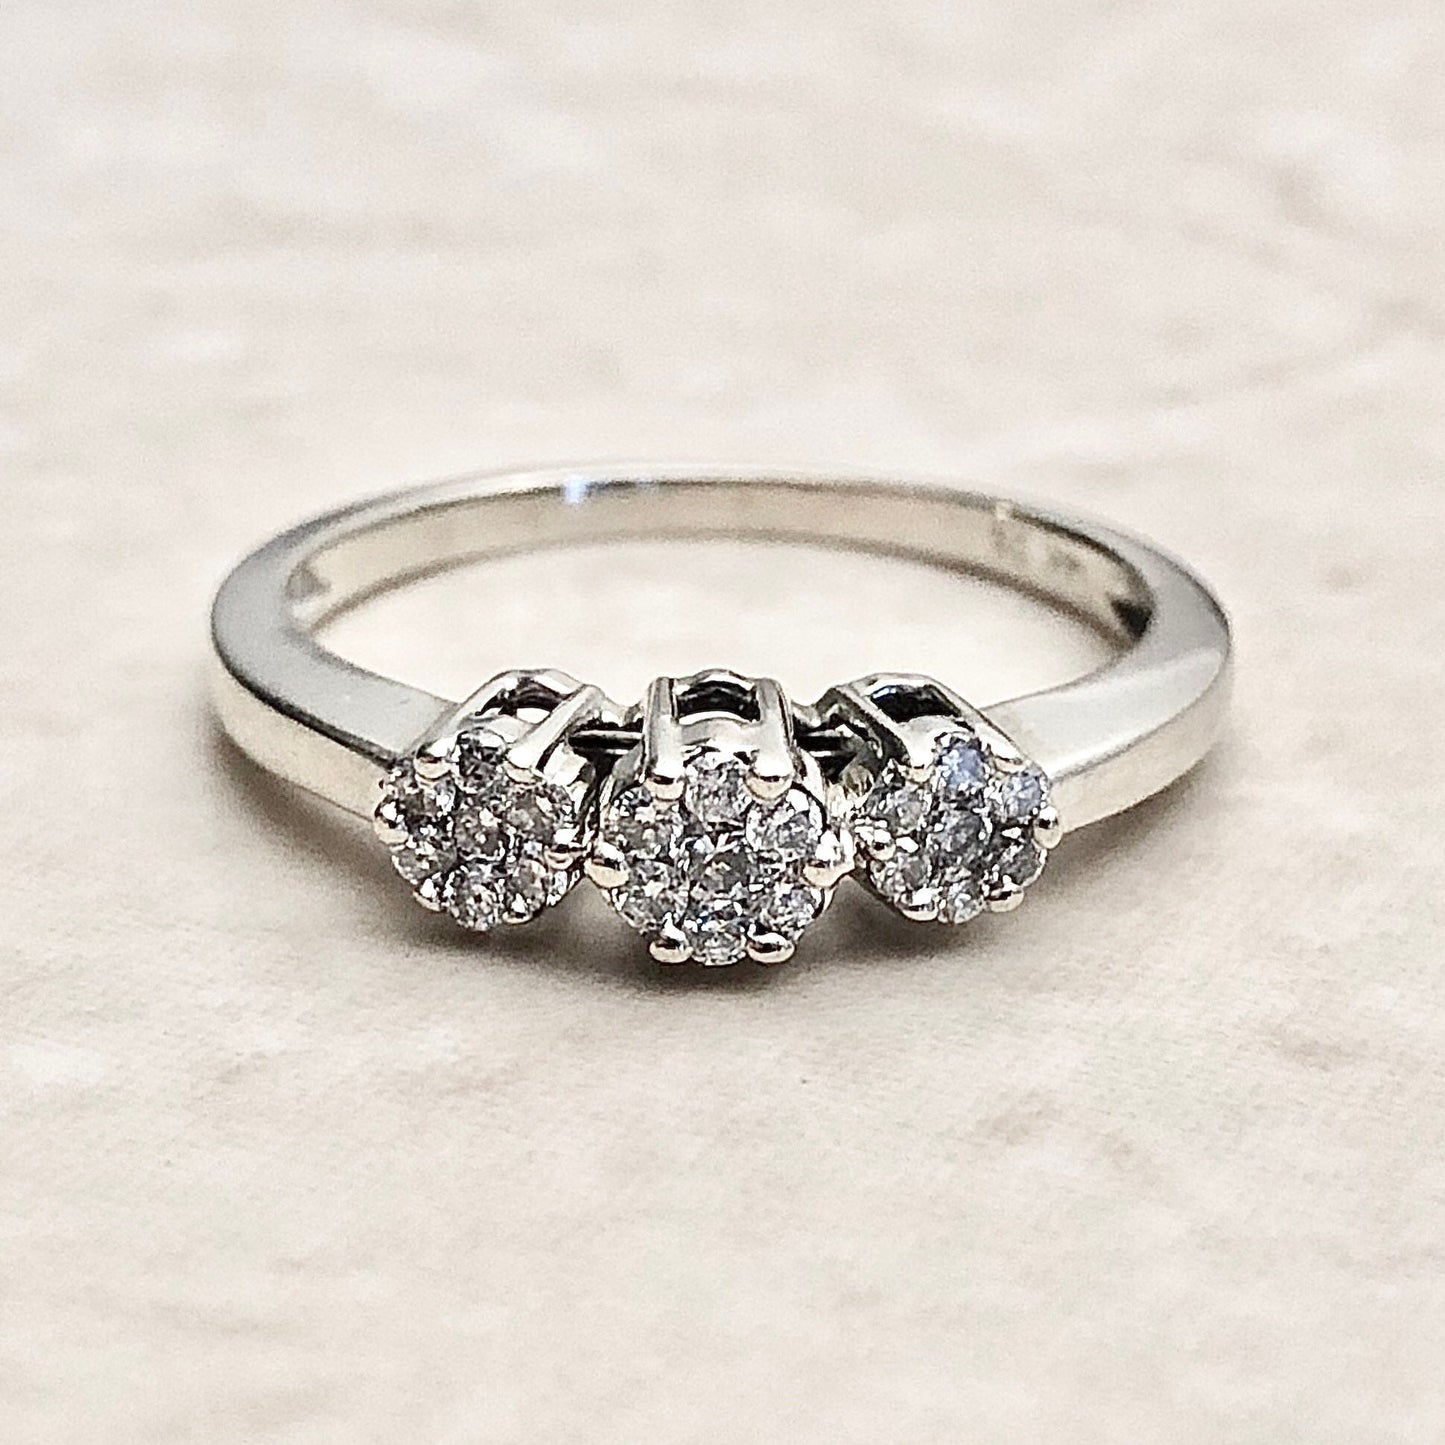 14K Cluster Pave Diamond Ring - White Gold Diamond Cocktail Ring - Birthday Gift For Her - Bridal Ring - Promis Ring - Engagement Ring